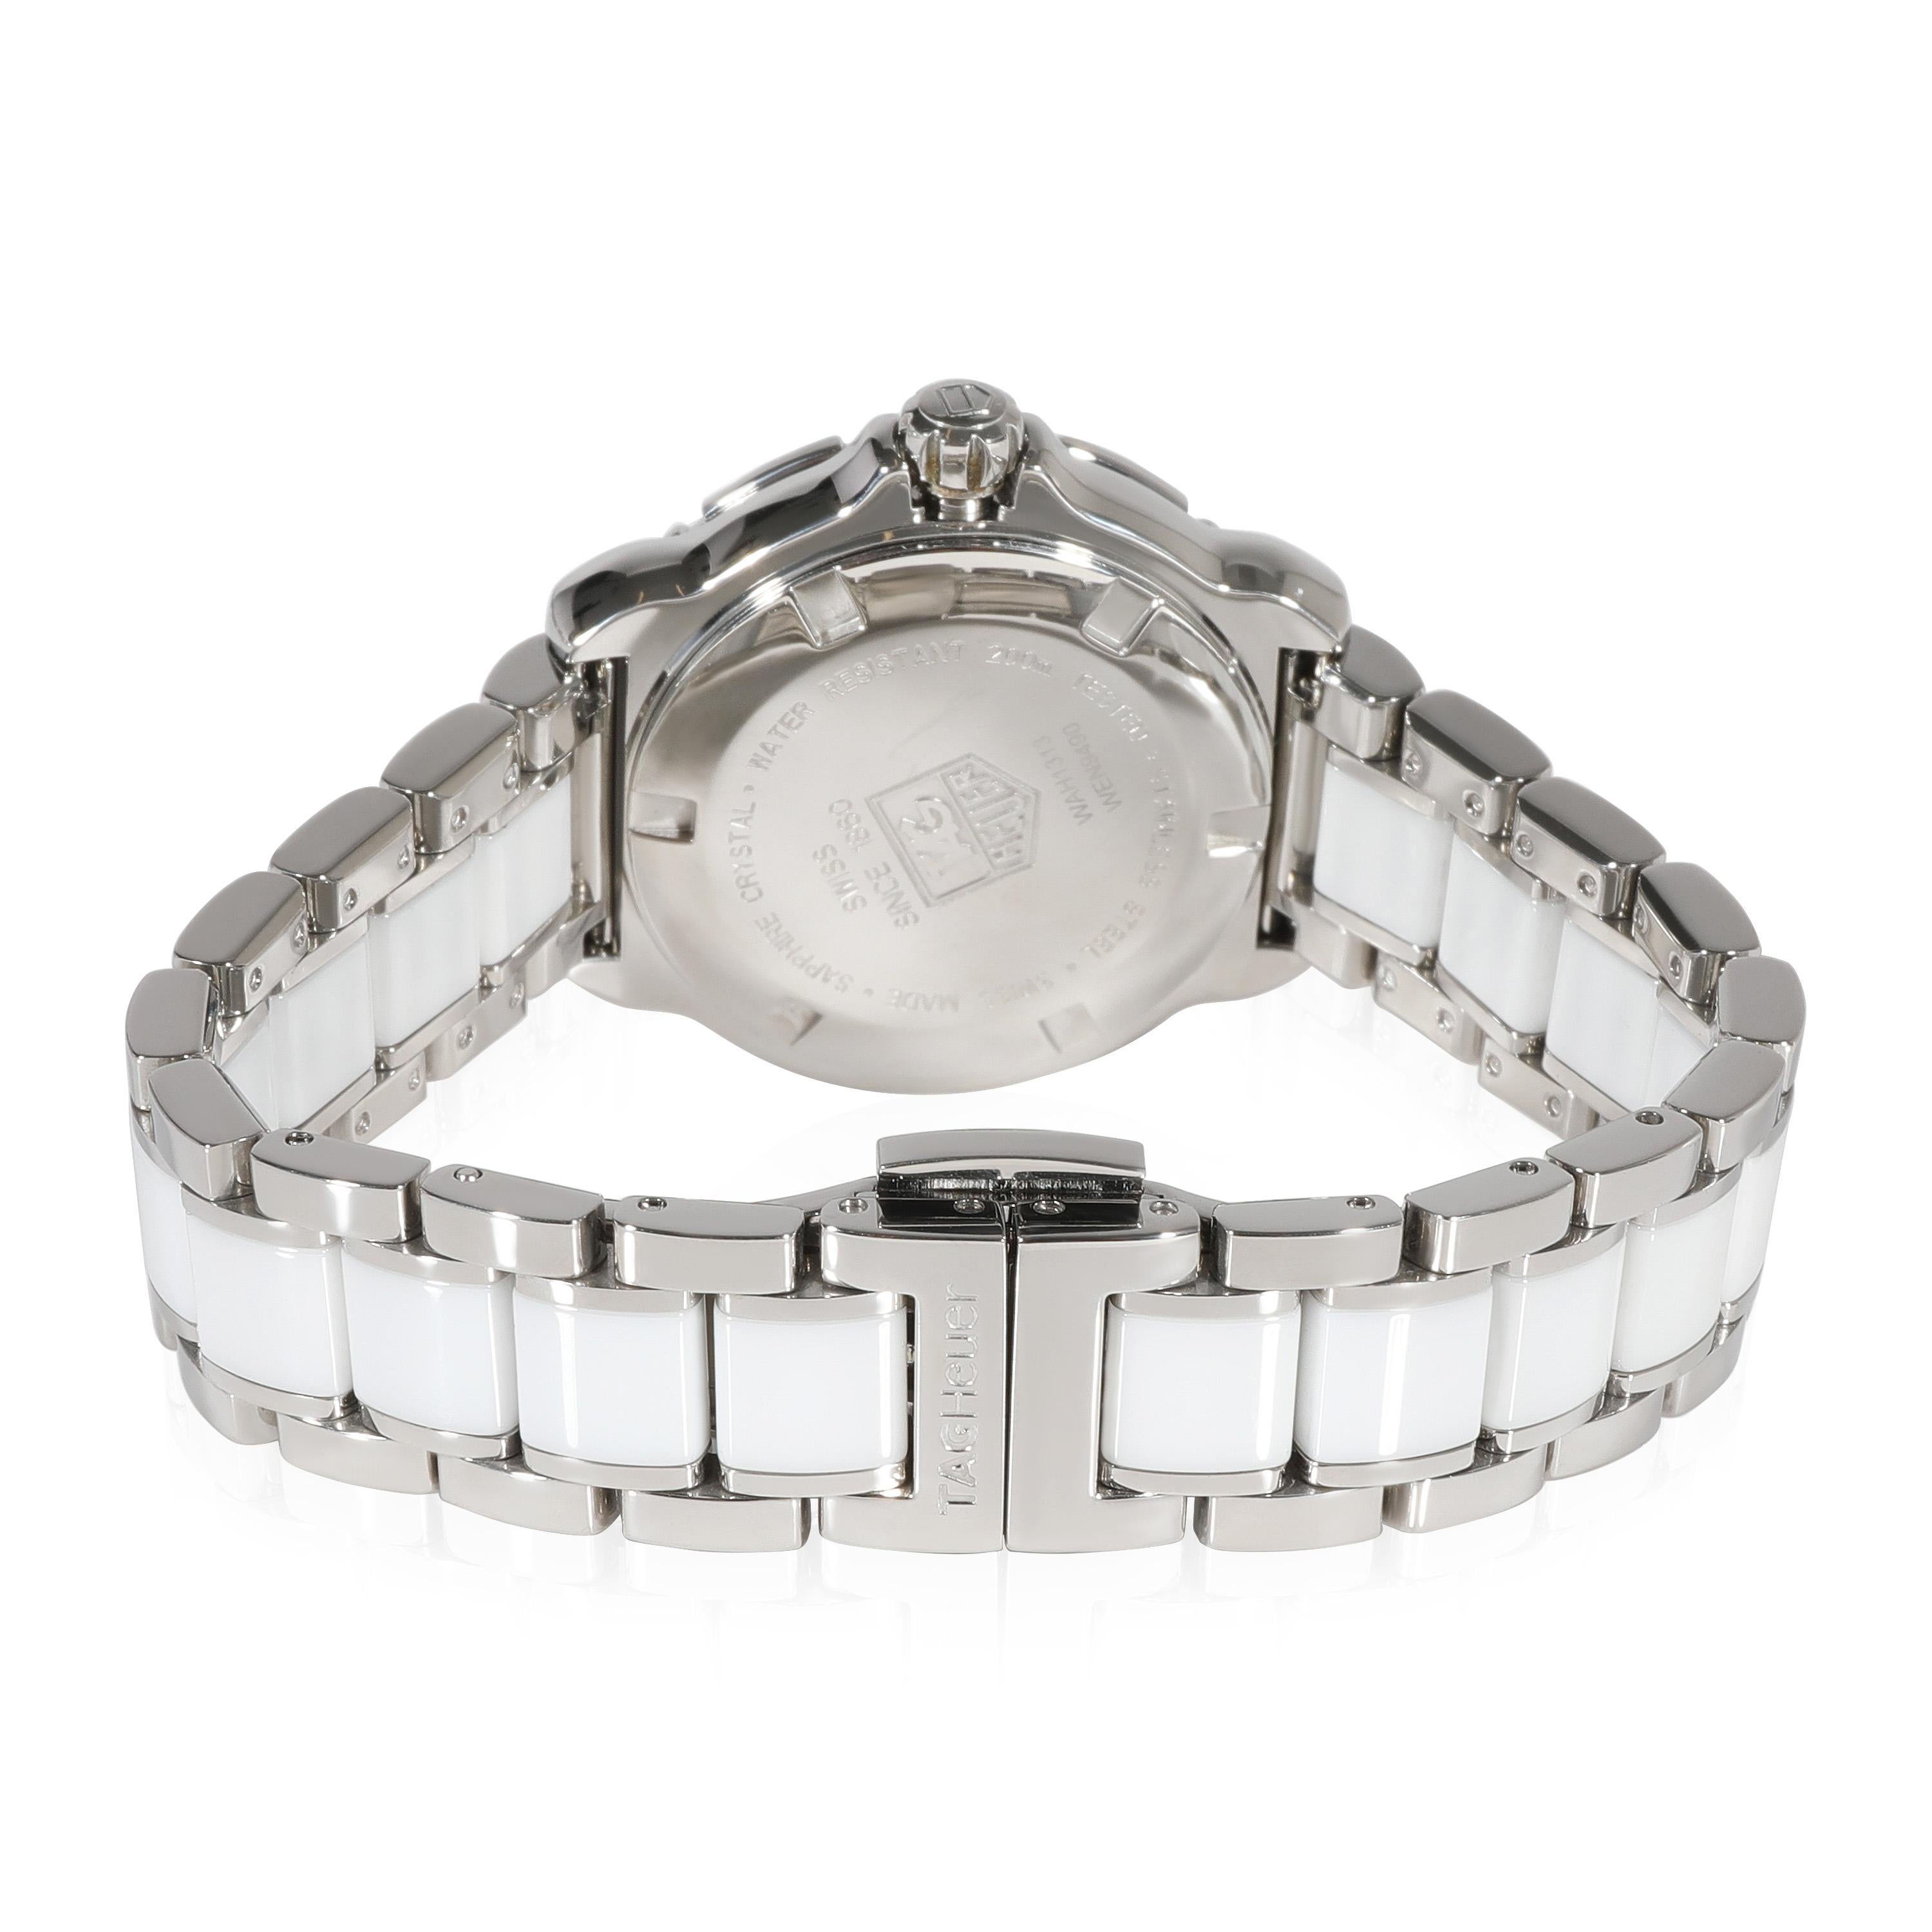 Tag Heuer Formula 1 WAH1313.BA0868 Women's Watch in  Stainless Steel/Ceramic

SKU: 119234

PRIMARY DETAILS
Brand: Tag Heuer
Model: Formula 1
Country of Origin: Switzerland
Movement Type: Quartz: Battery
Year of Manufacture: 2010-2019
Condition: